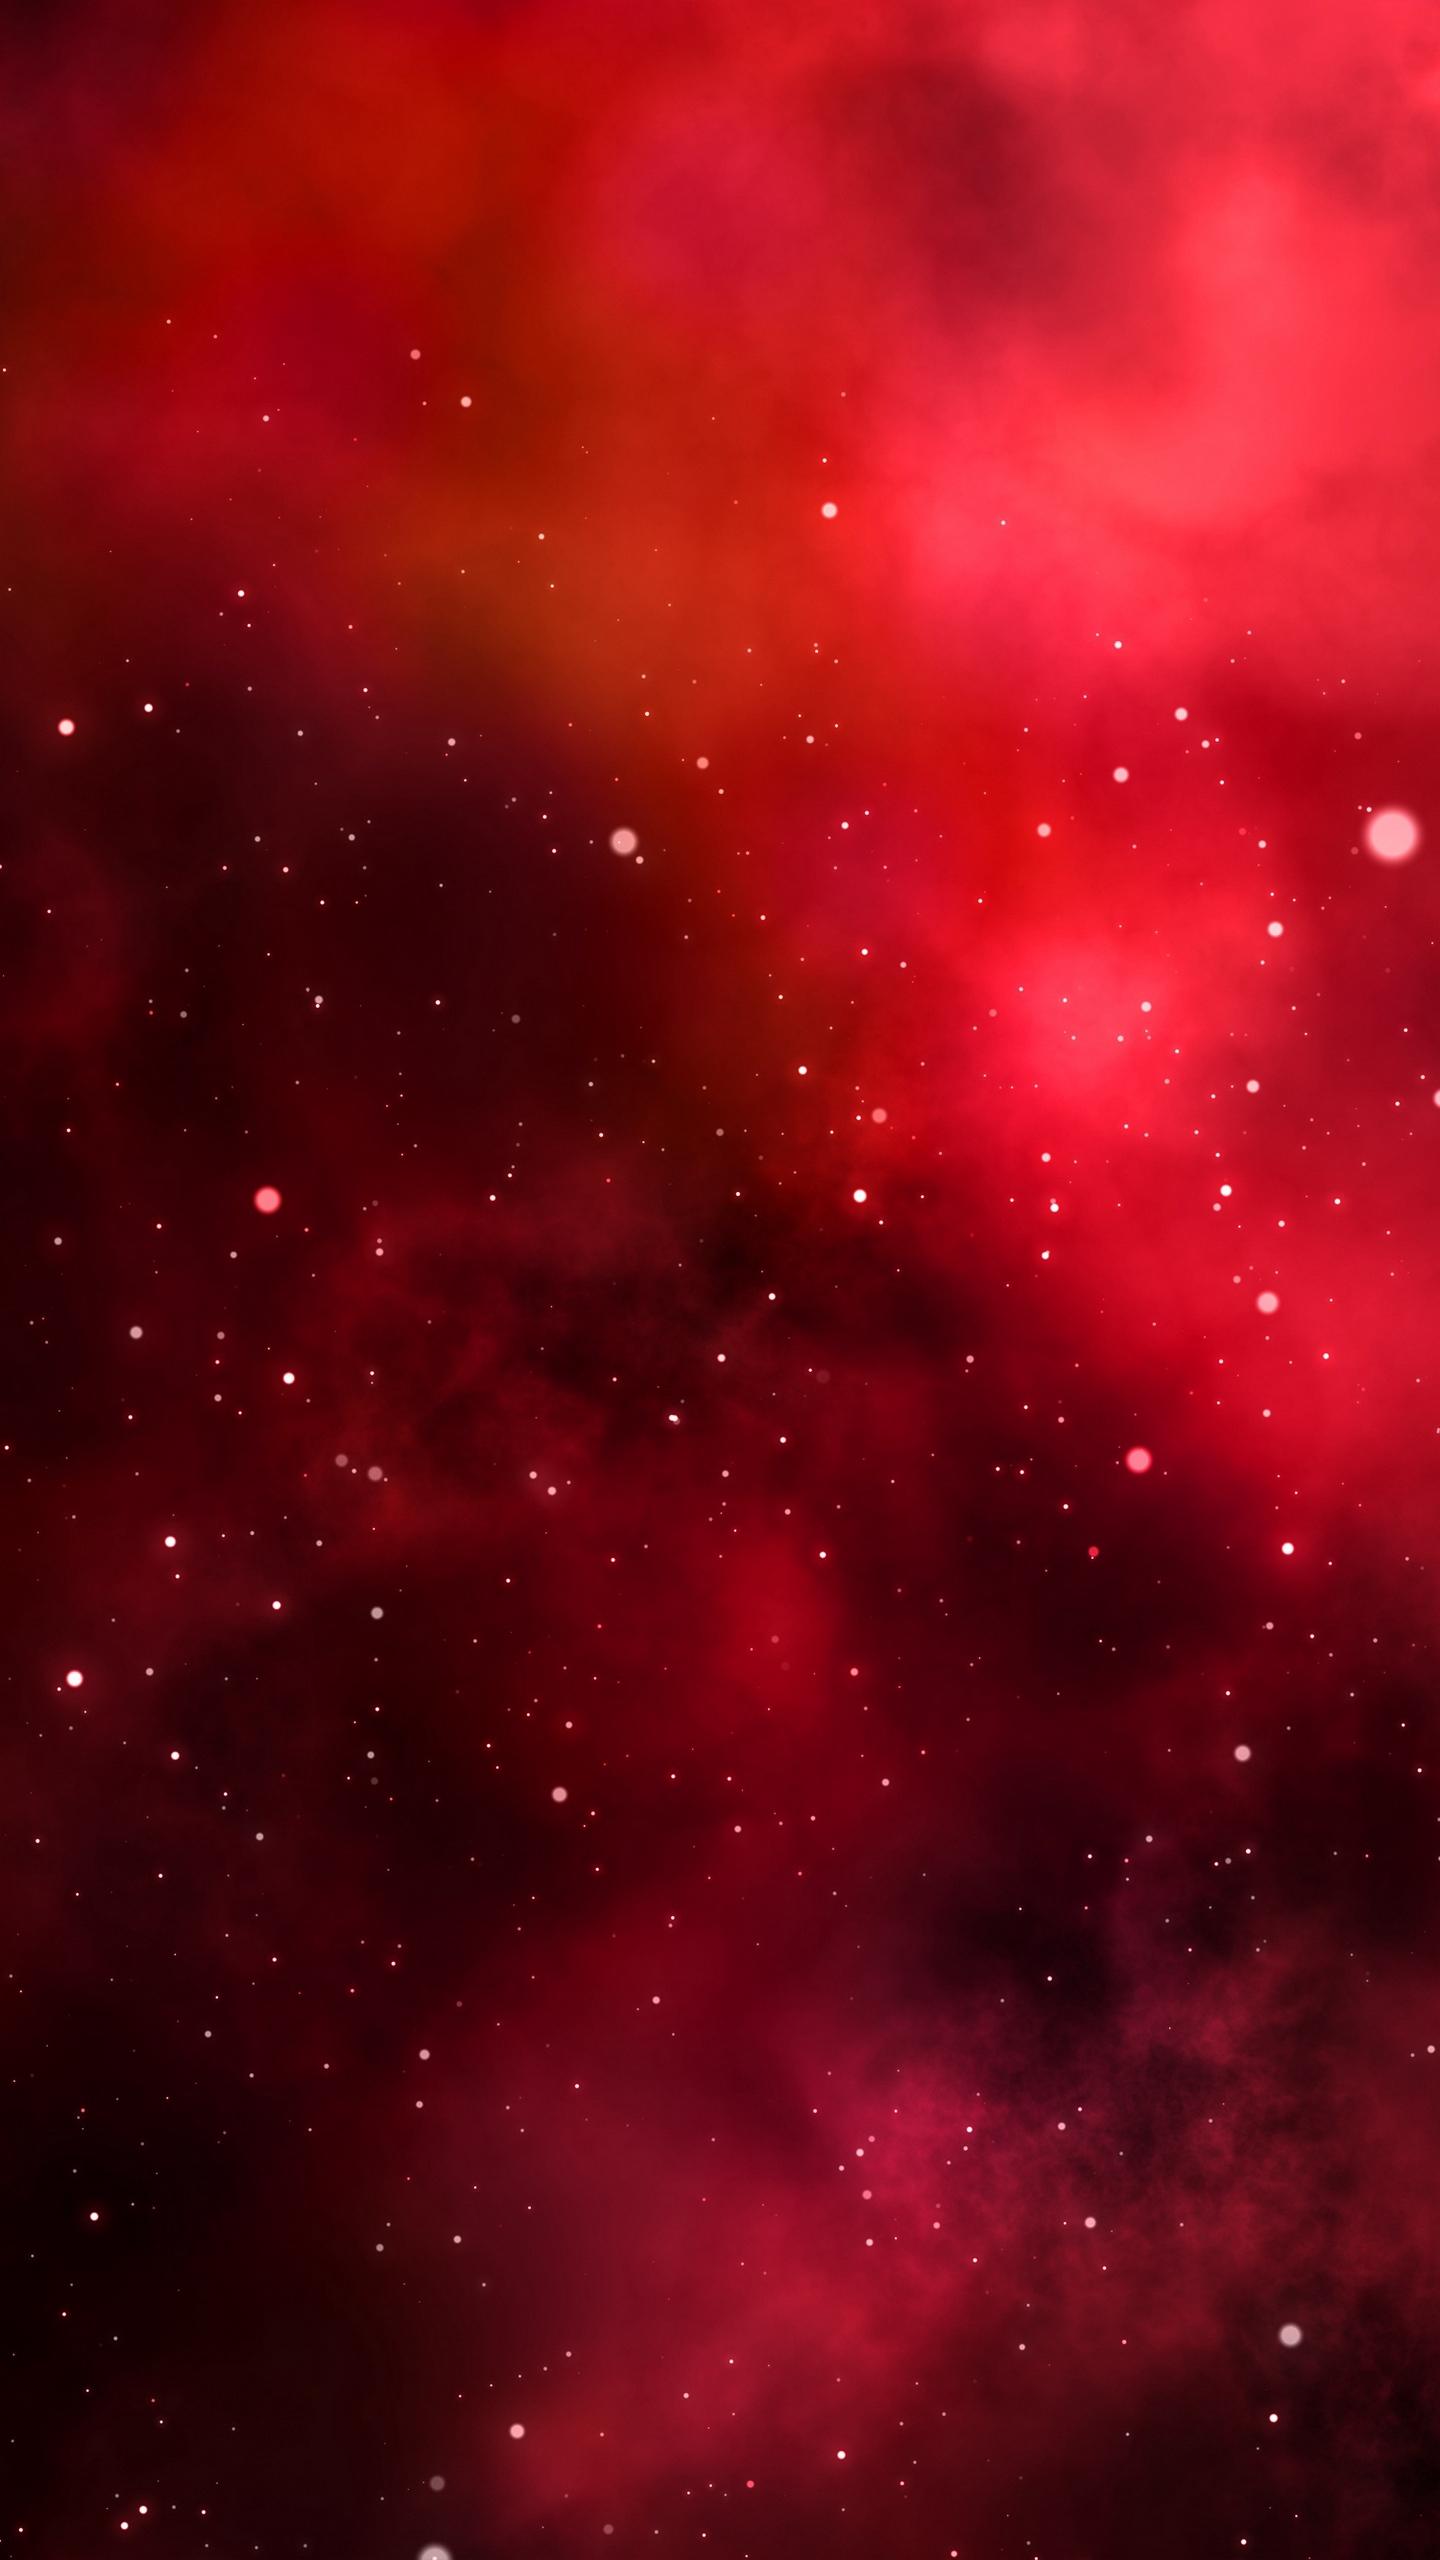 Red Space Iphone Wallpapers Top Free Red Space Iphone Backgrounds Wallpaperaccess